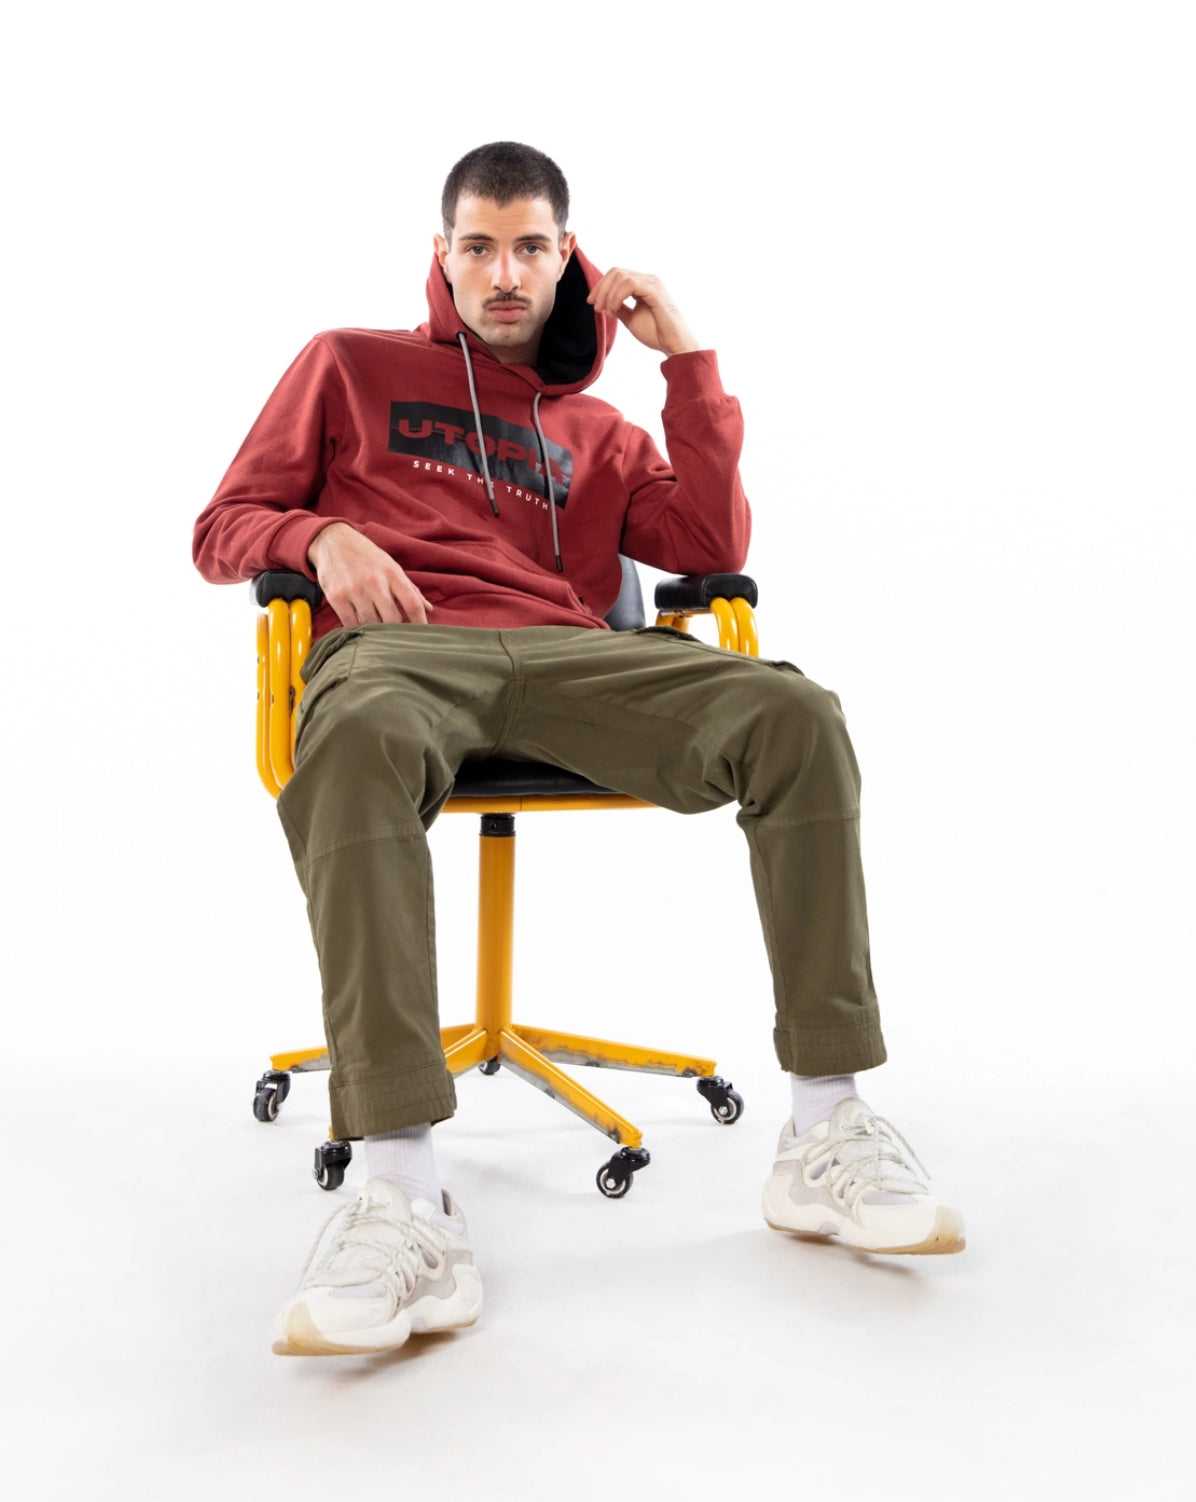 Man sitting on yellow chair, wearing red hoodie with lettering and brown pants